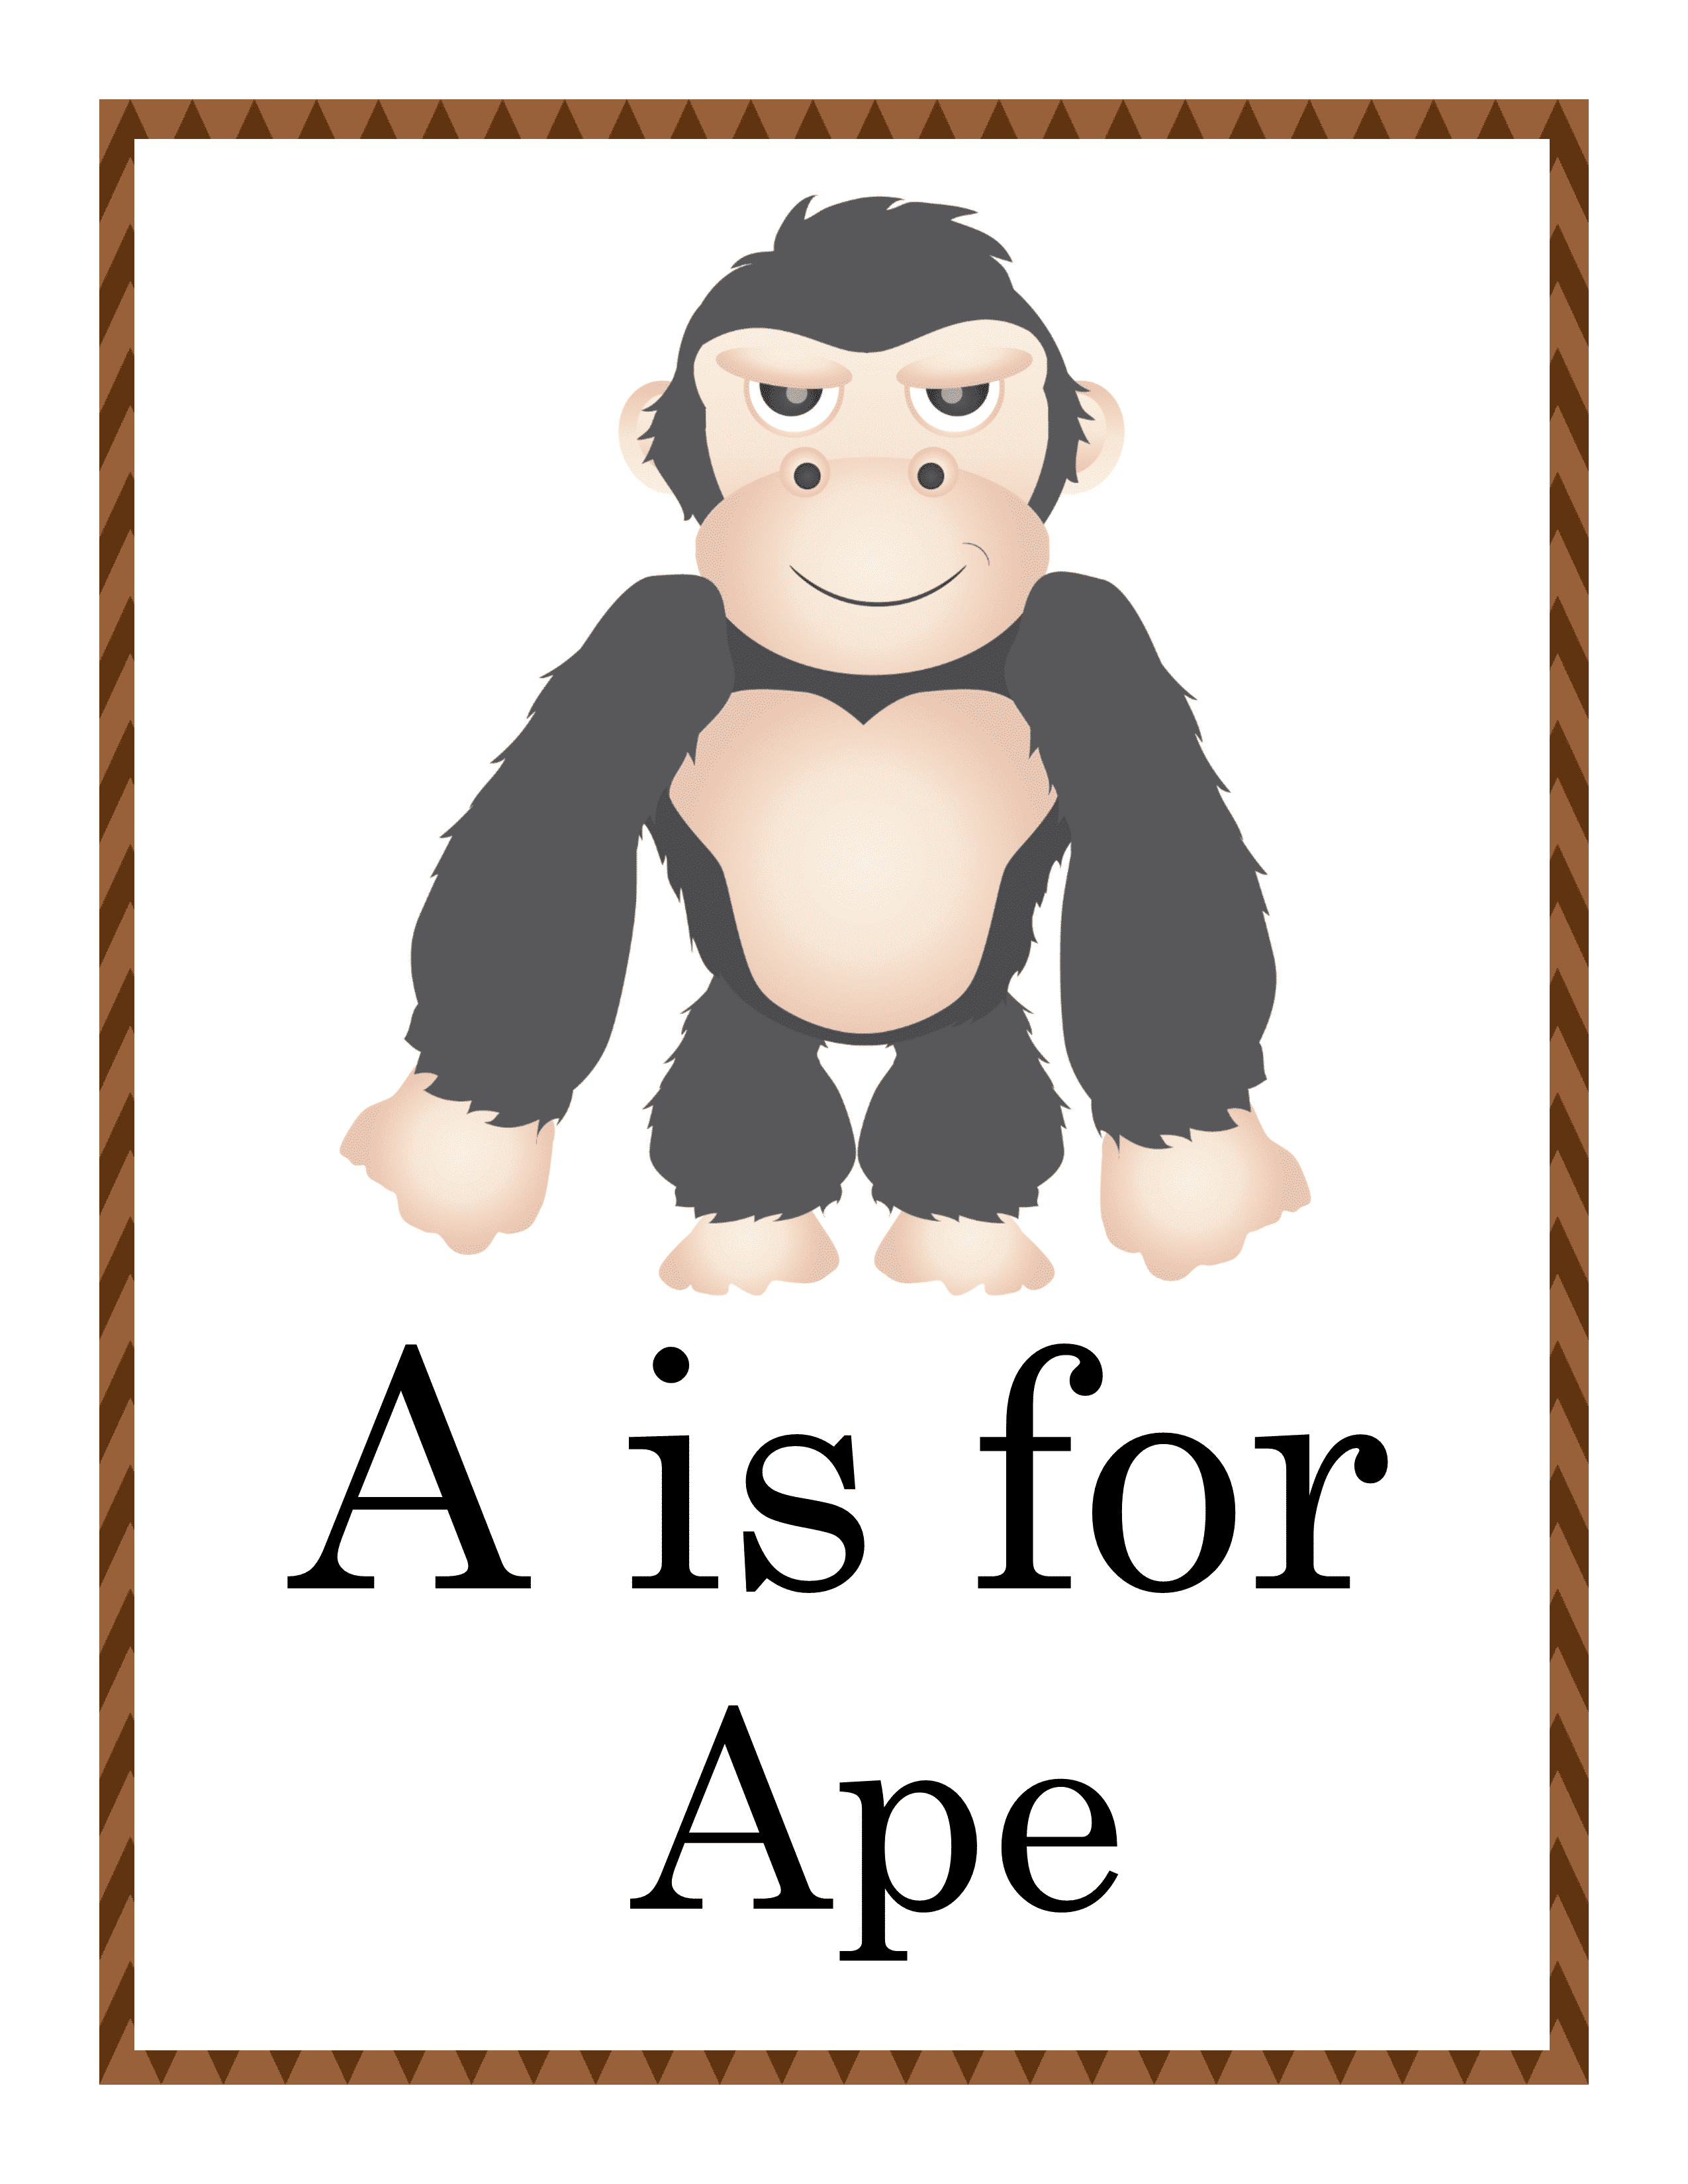 A is for Ape Activity Pack